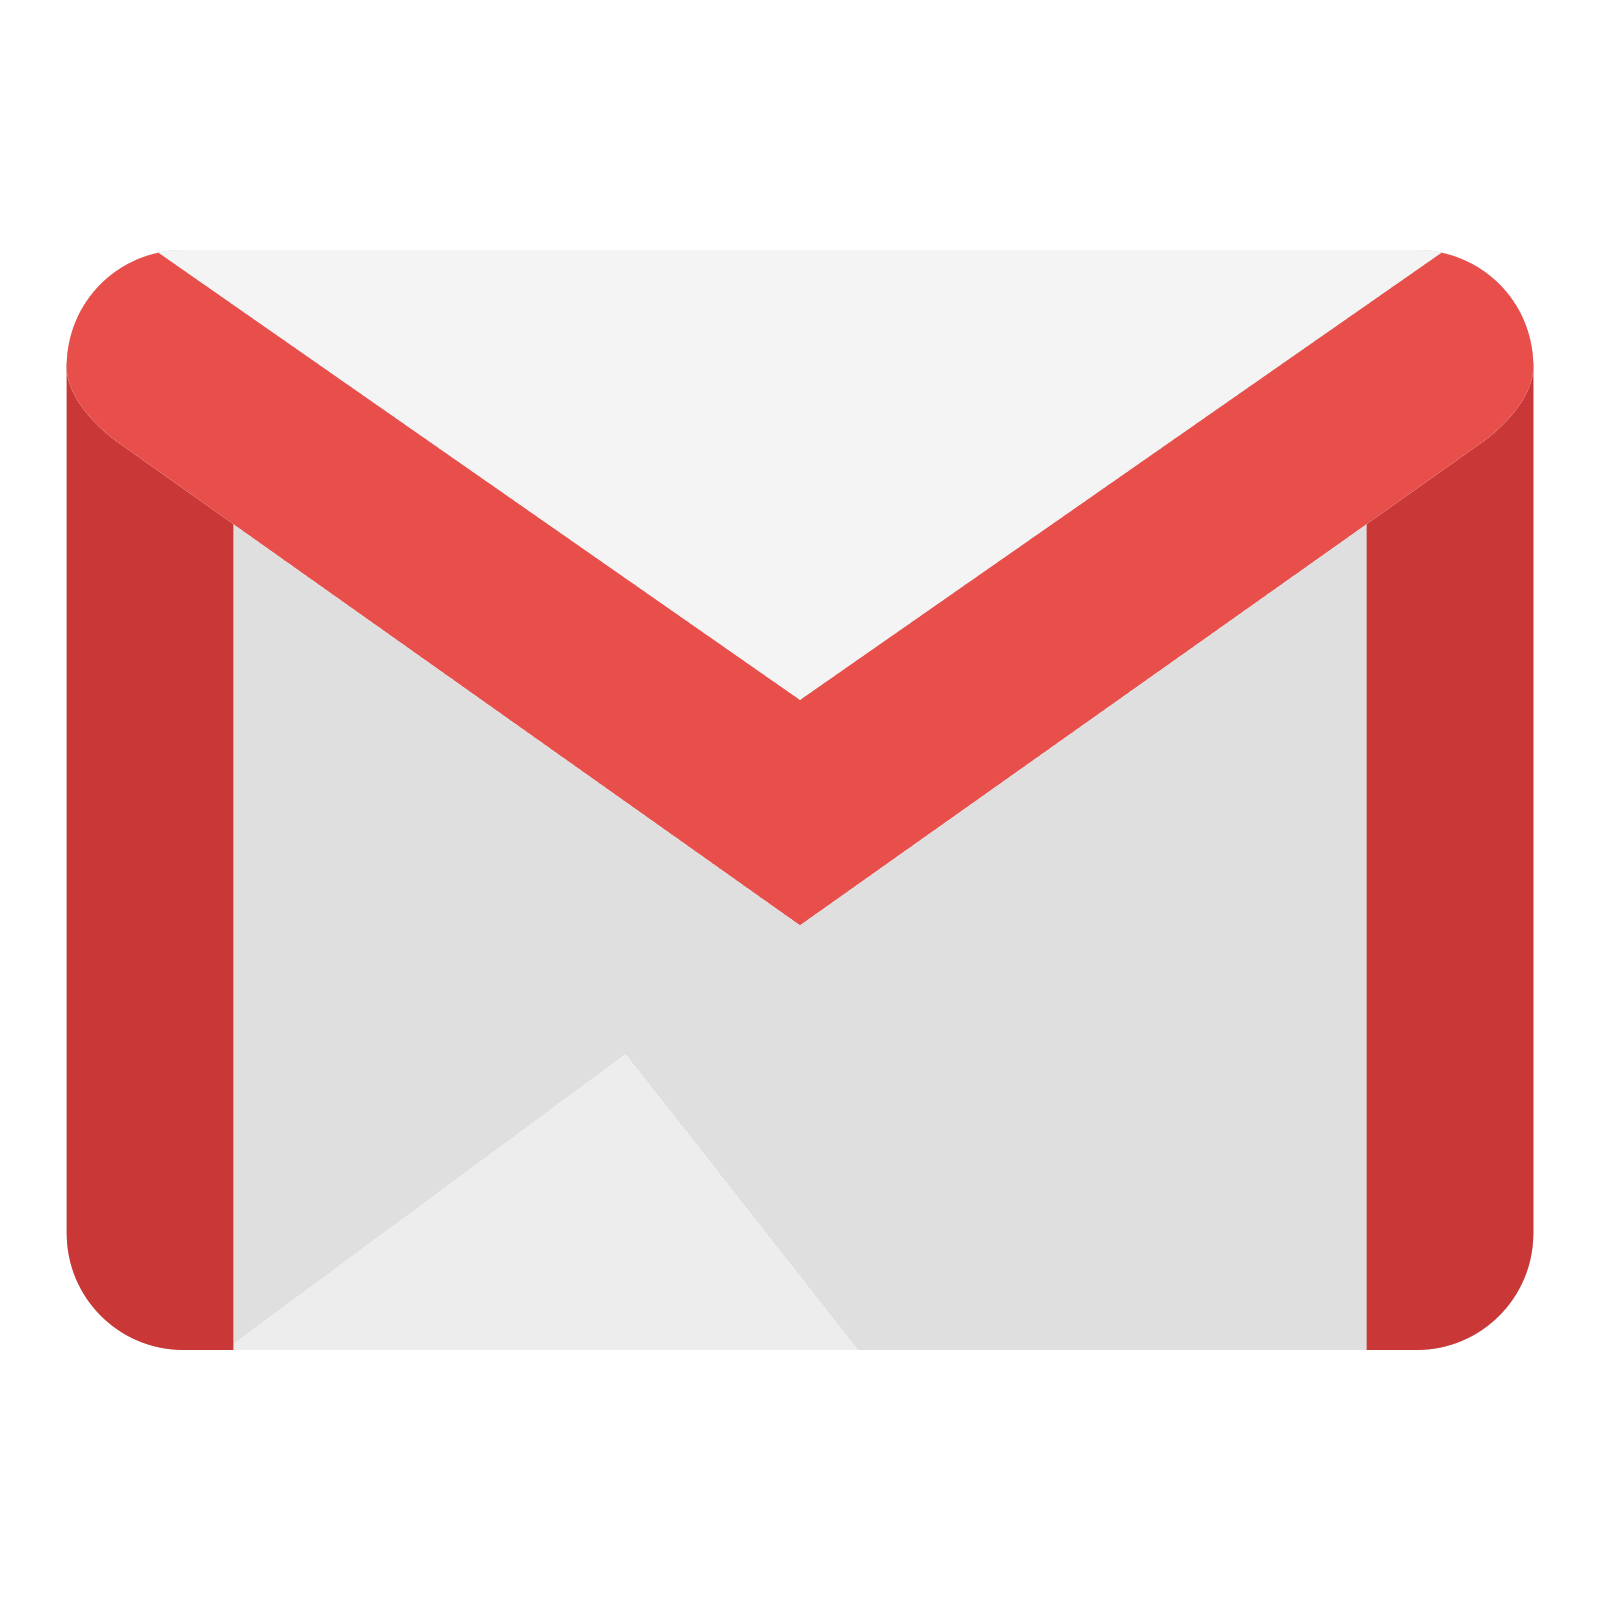 Email Studio for Gmail